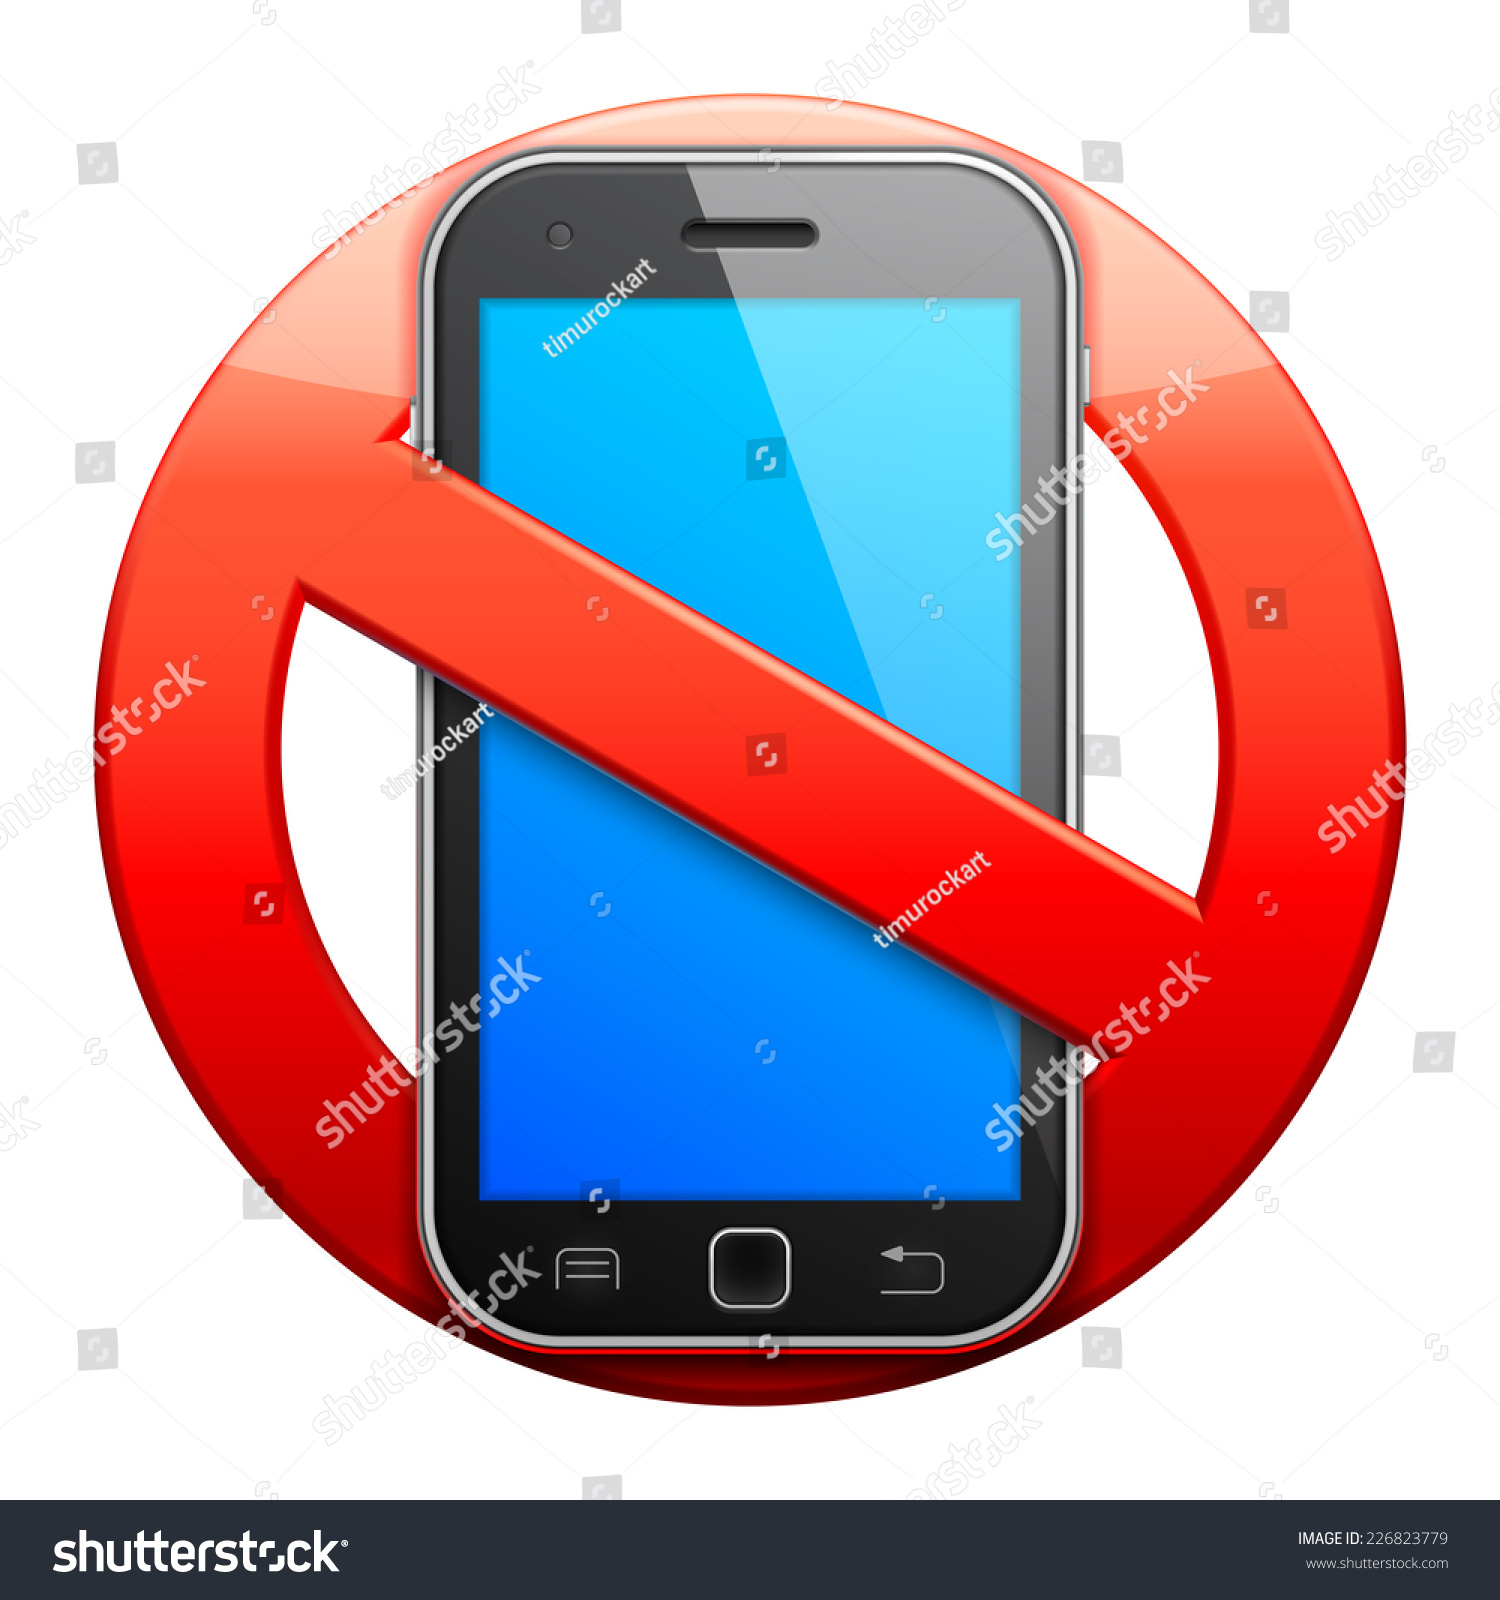 No Cell Phone Sign Stock Vector (Royalty Free) 226823779 | Shutterstock